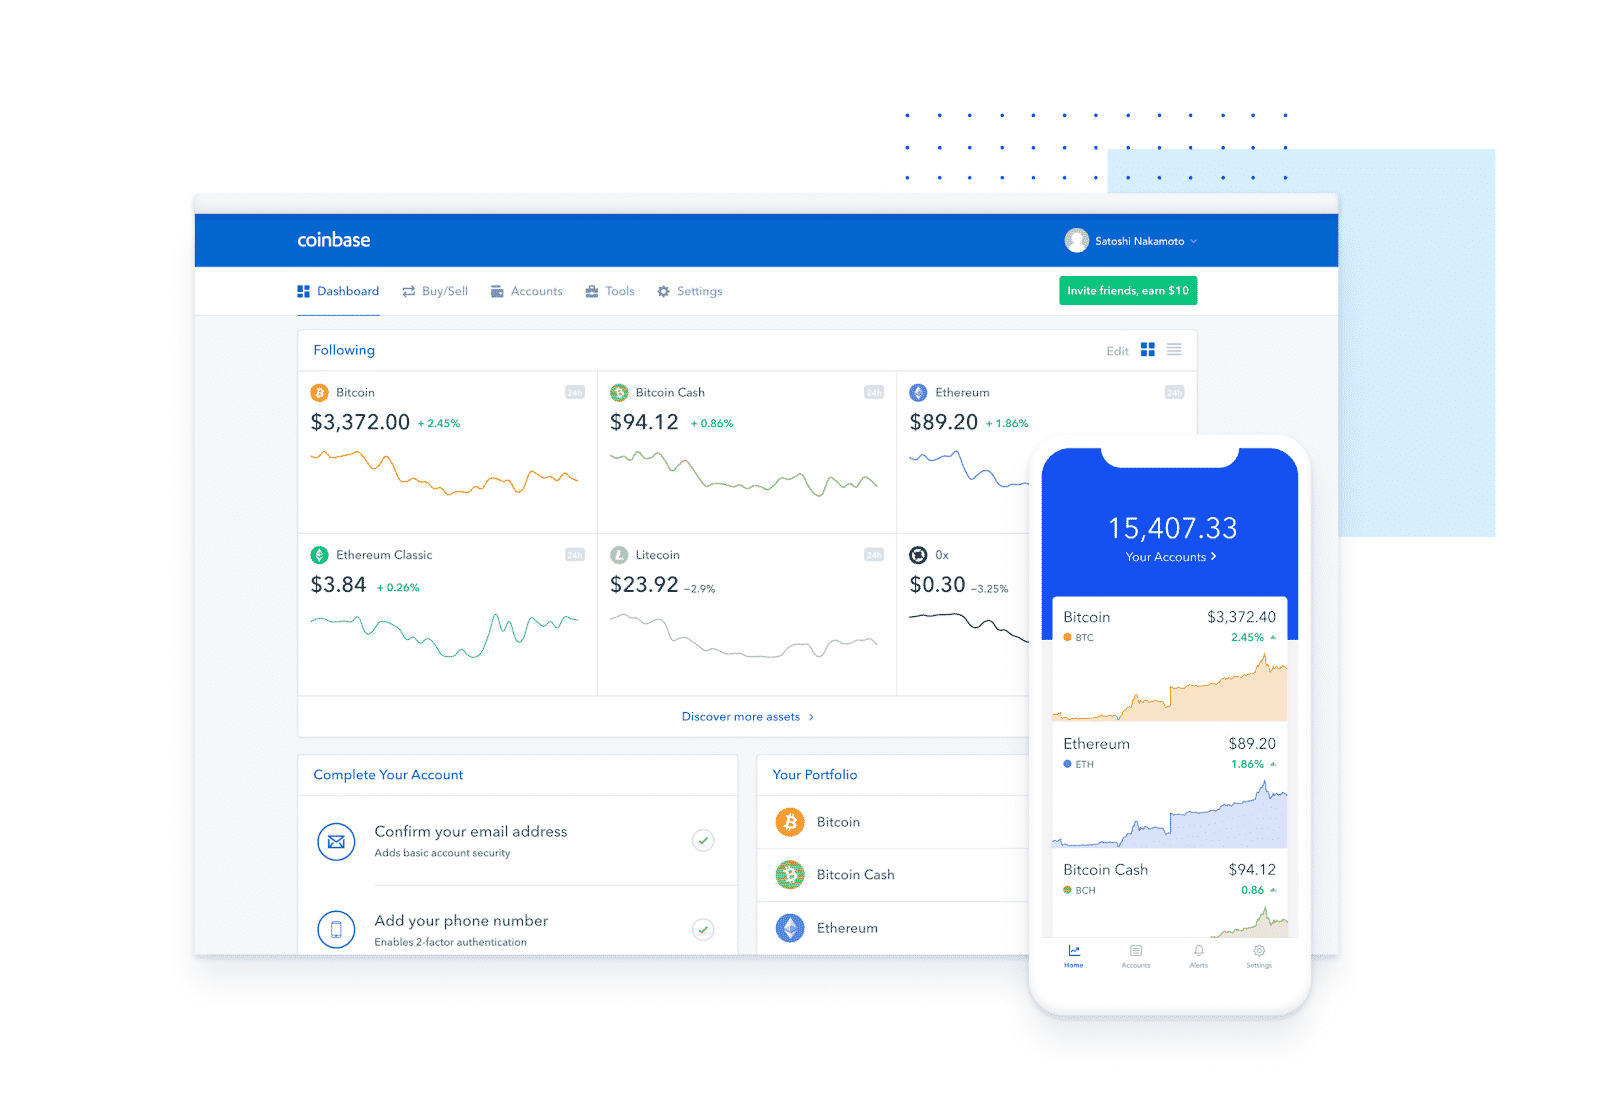 How to Trade Cryptocurrency on Coinbase for Beginners